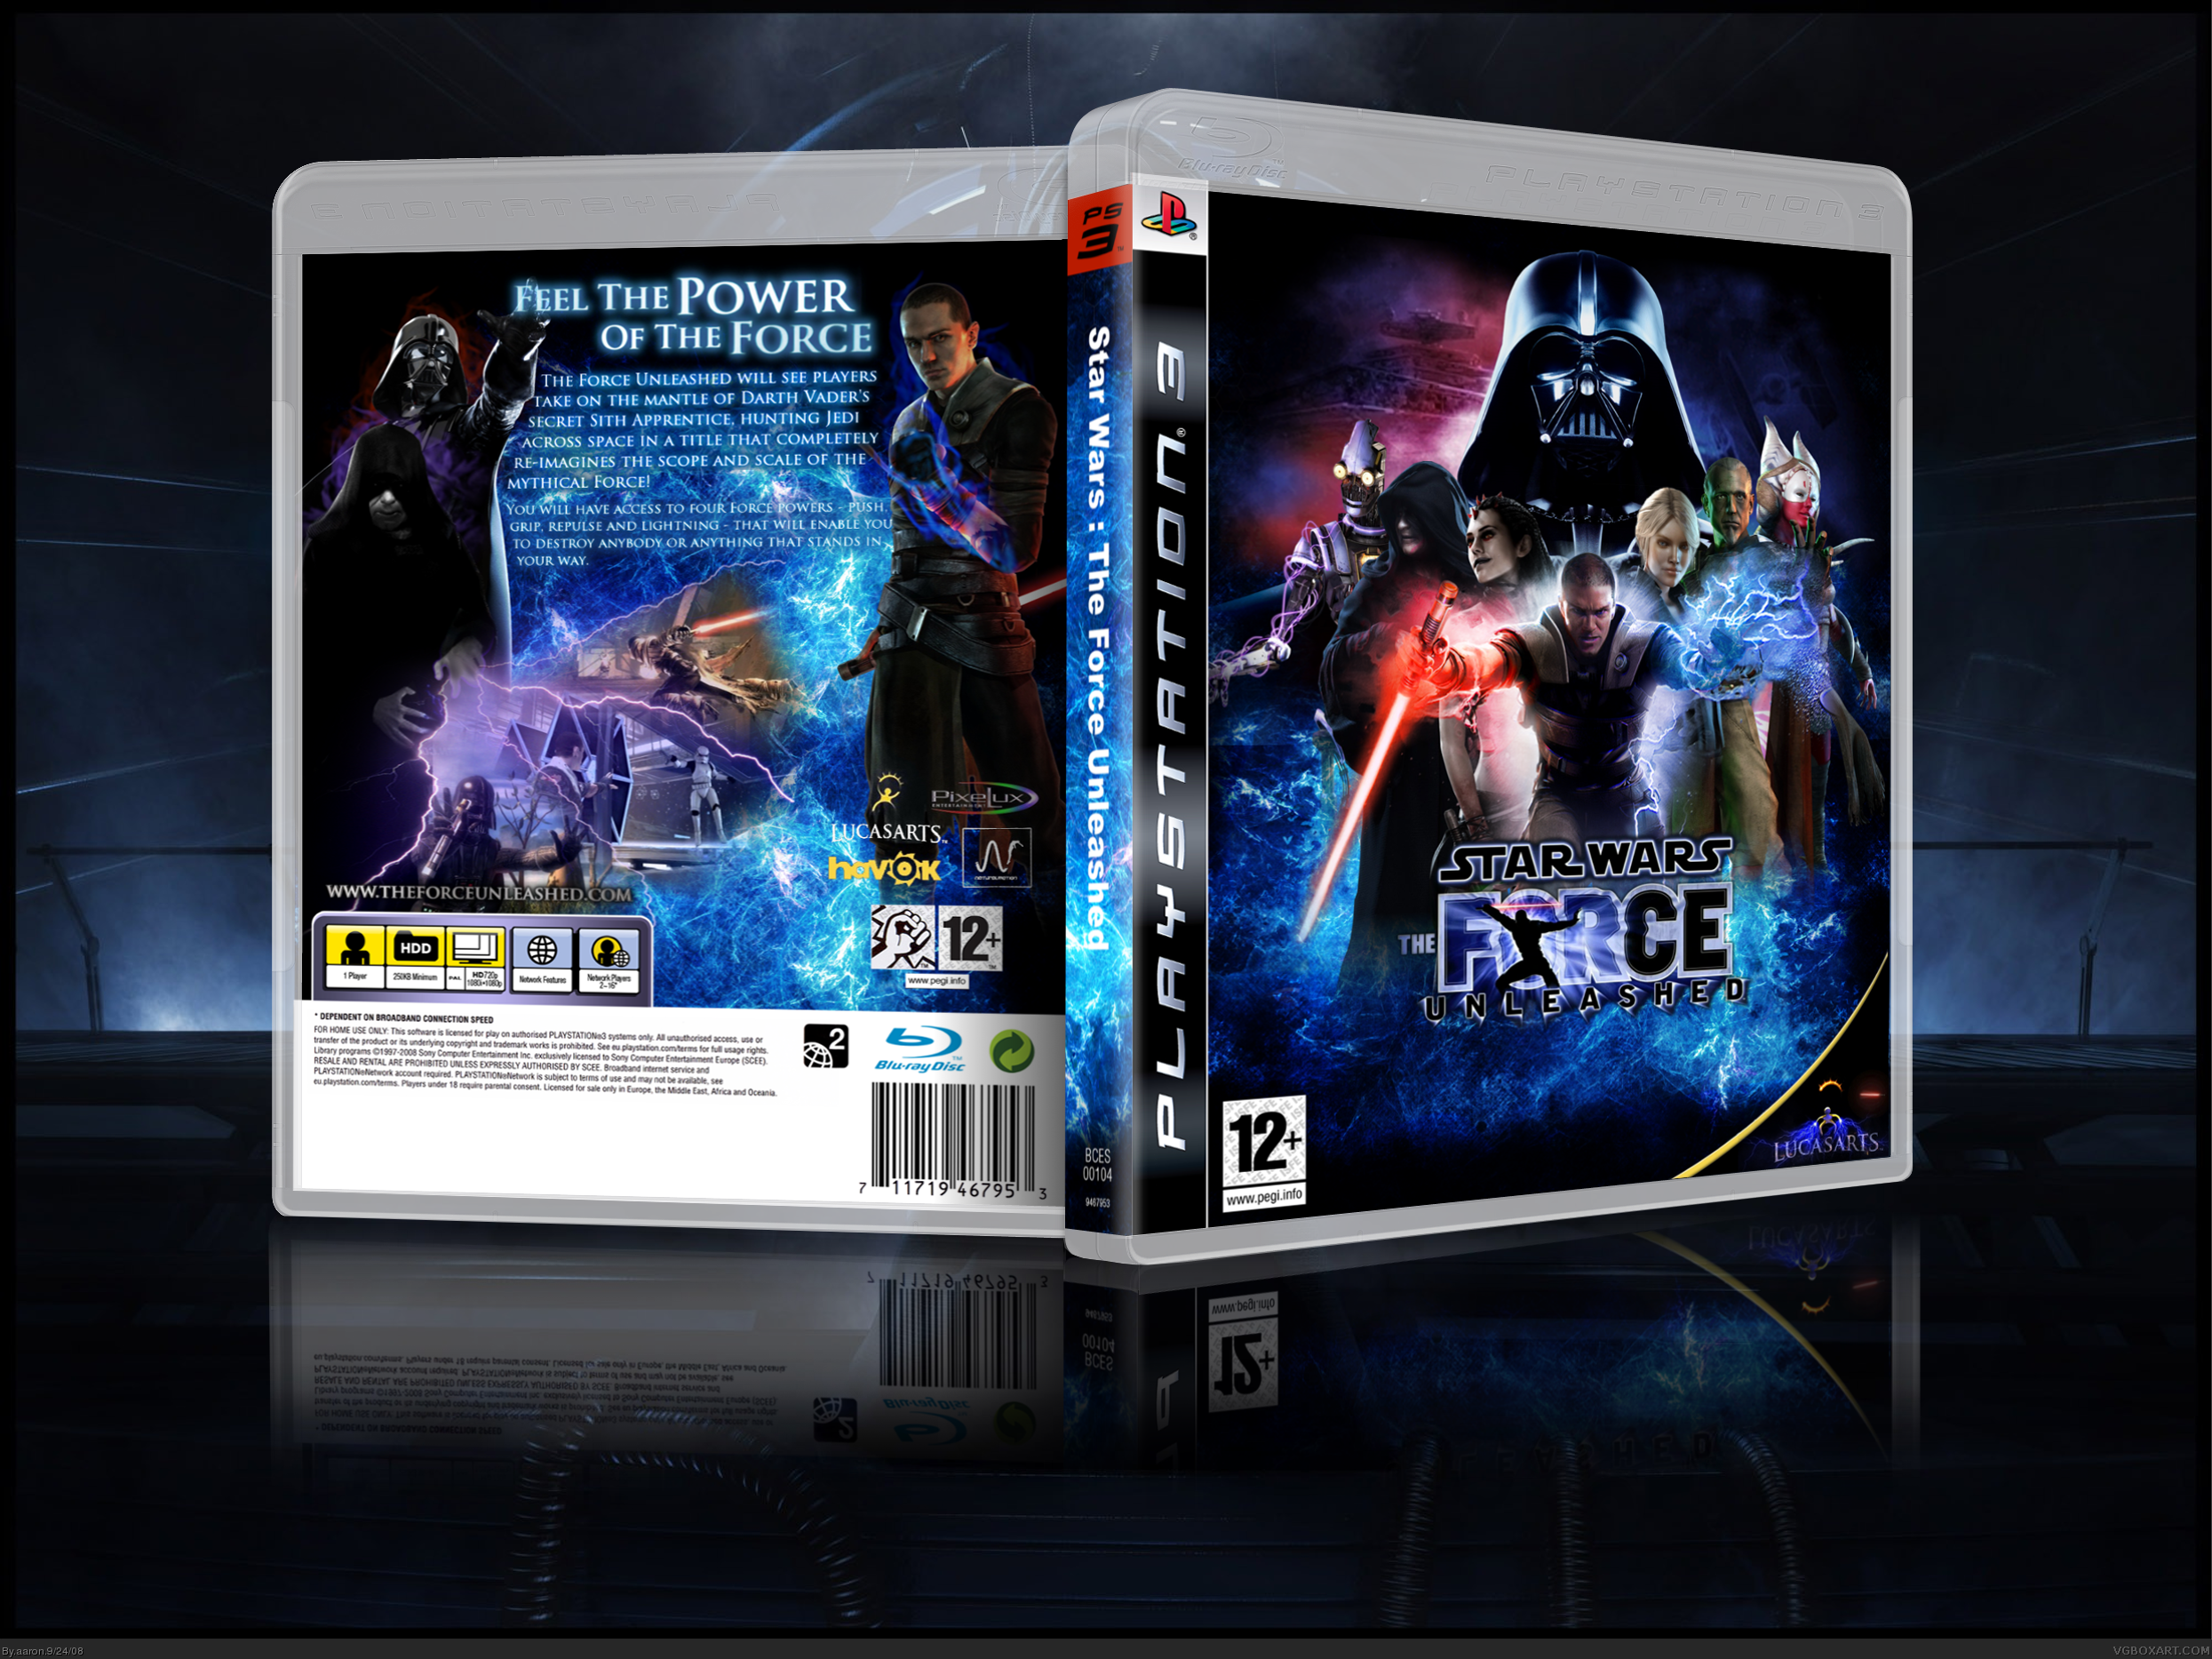 Star wars the force unleashed коды. Star Wars the Force unleashed ps2. PS Vita Star Wars Force unleashed. Star Wars the Force unleashed ps2 обложка Pal. Star Wars the Force unleashed 3.